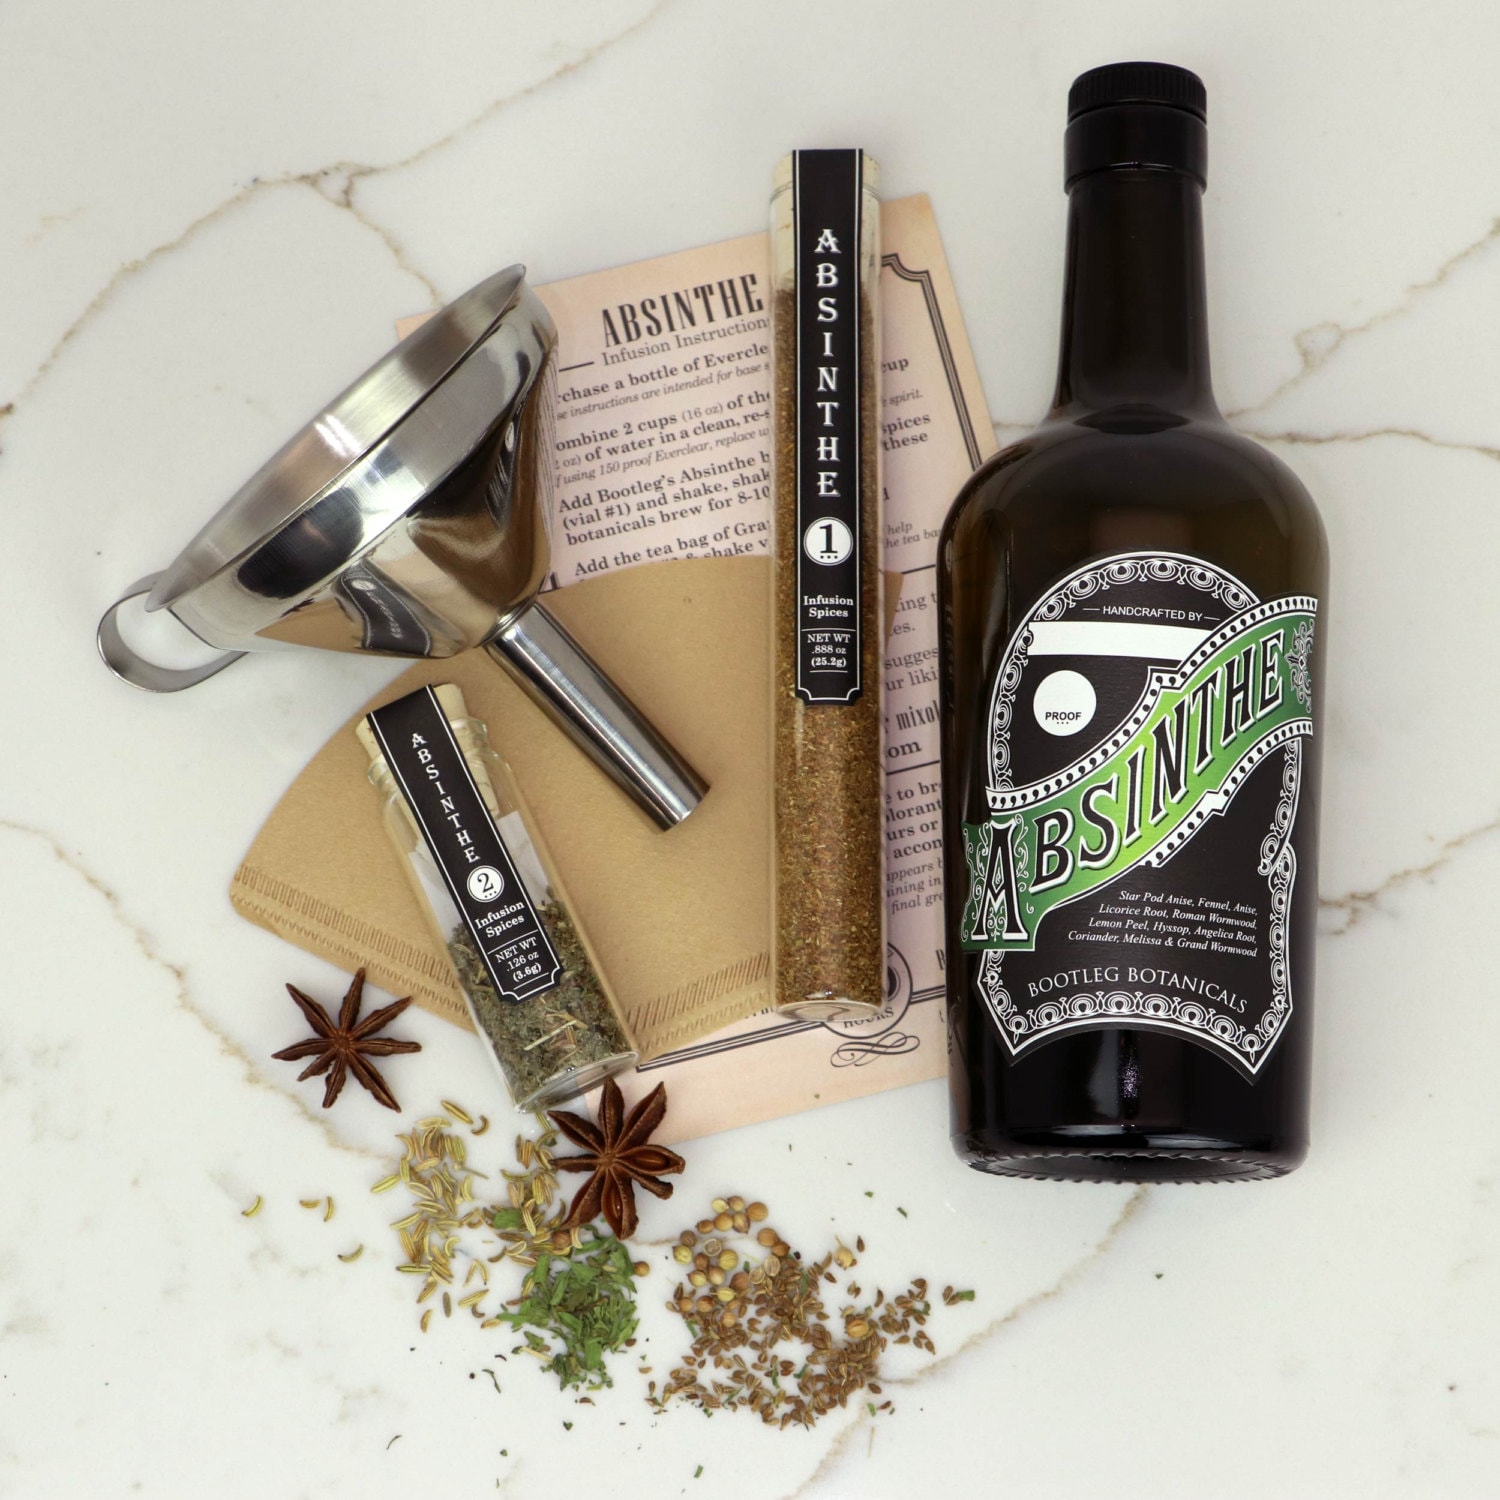 What Is Absinthe?, Cooking School